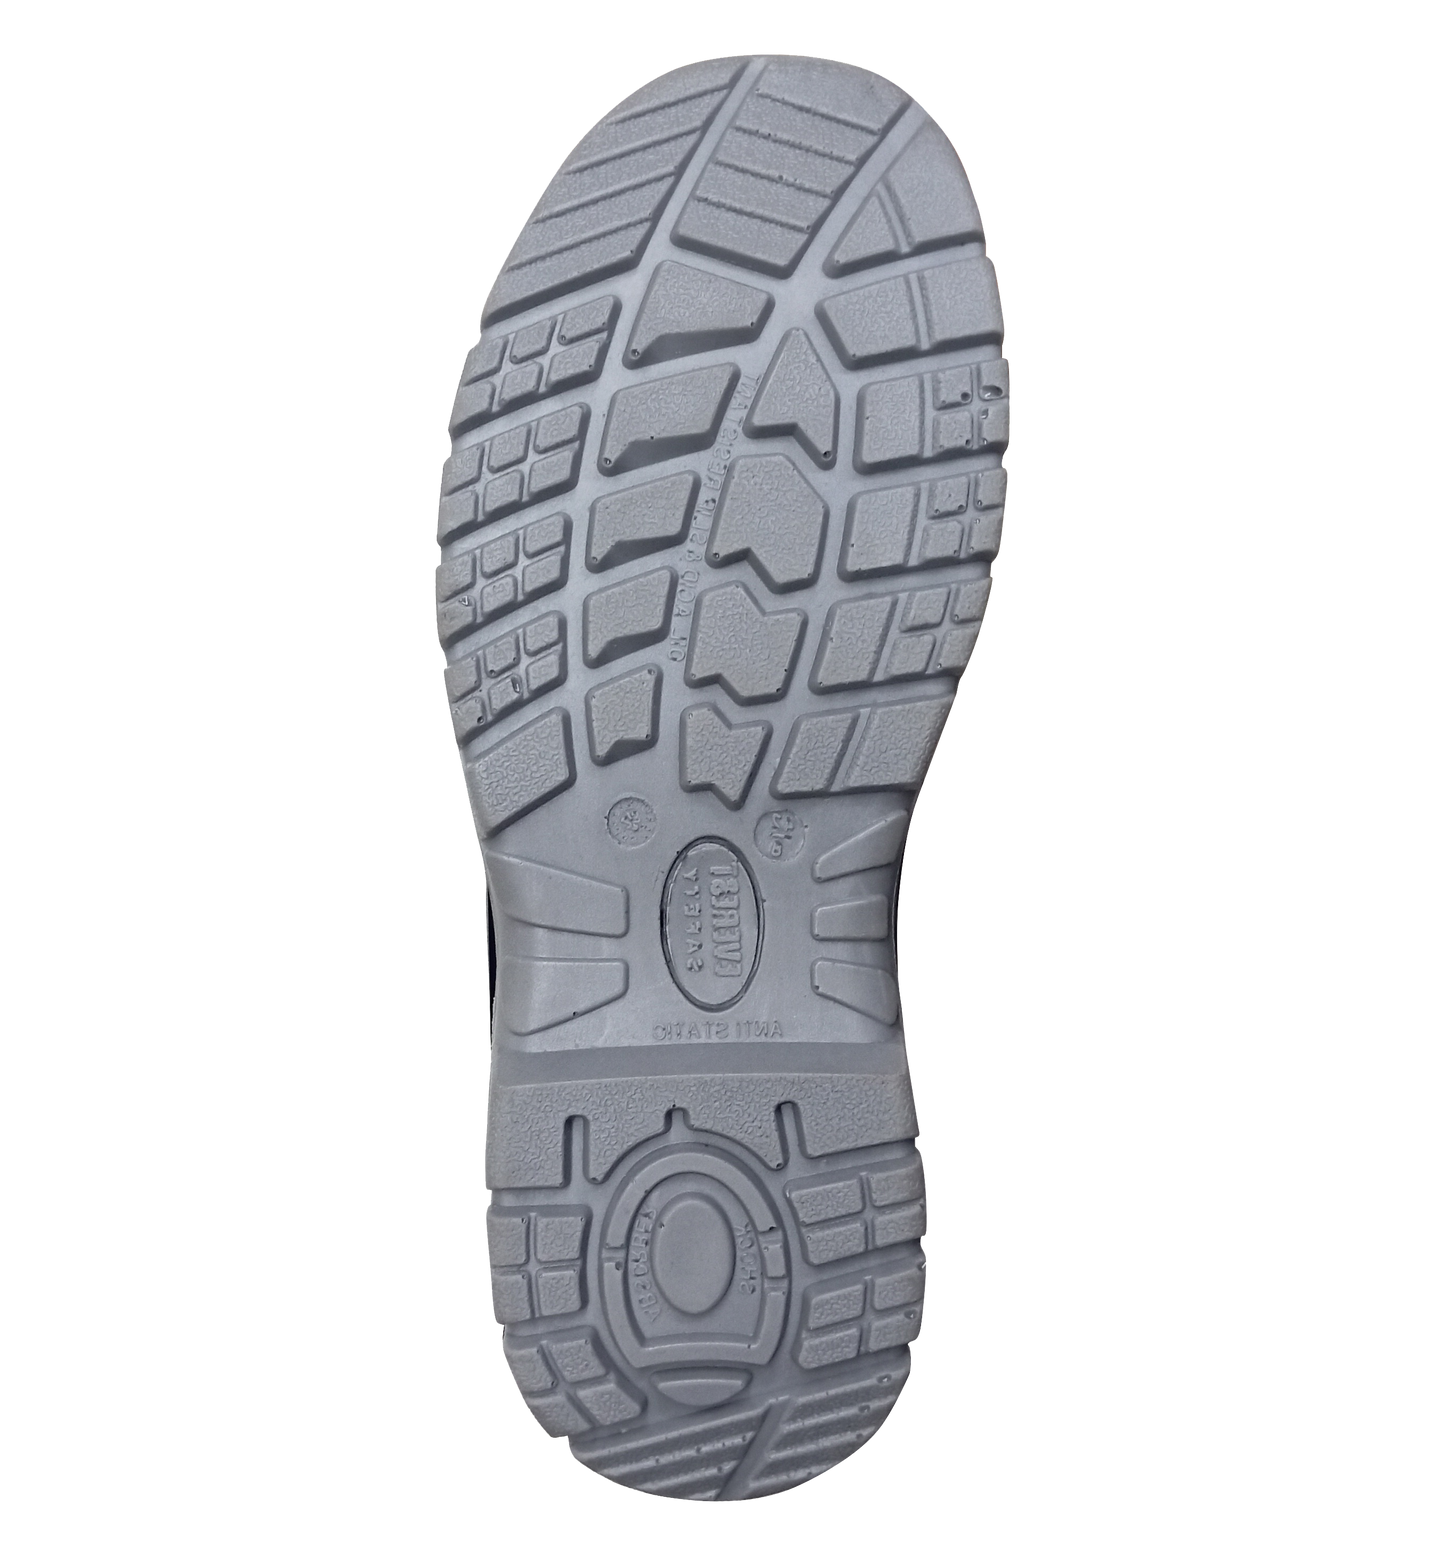 Light weight double density safety shoe MS 03